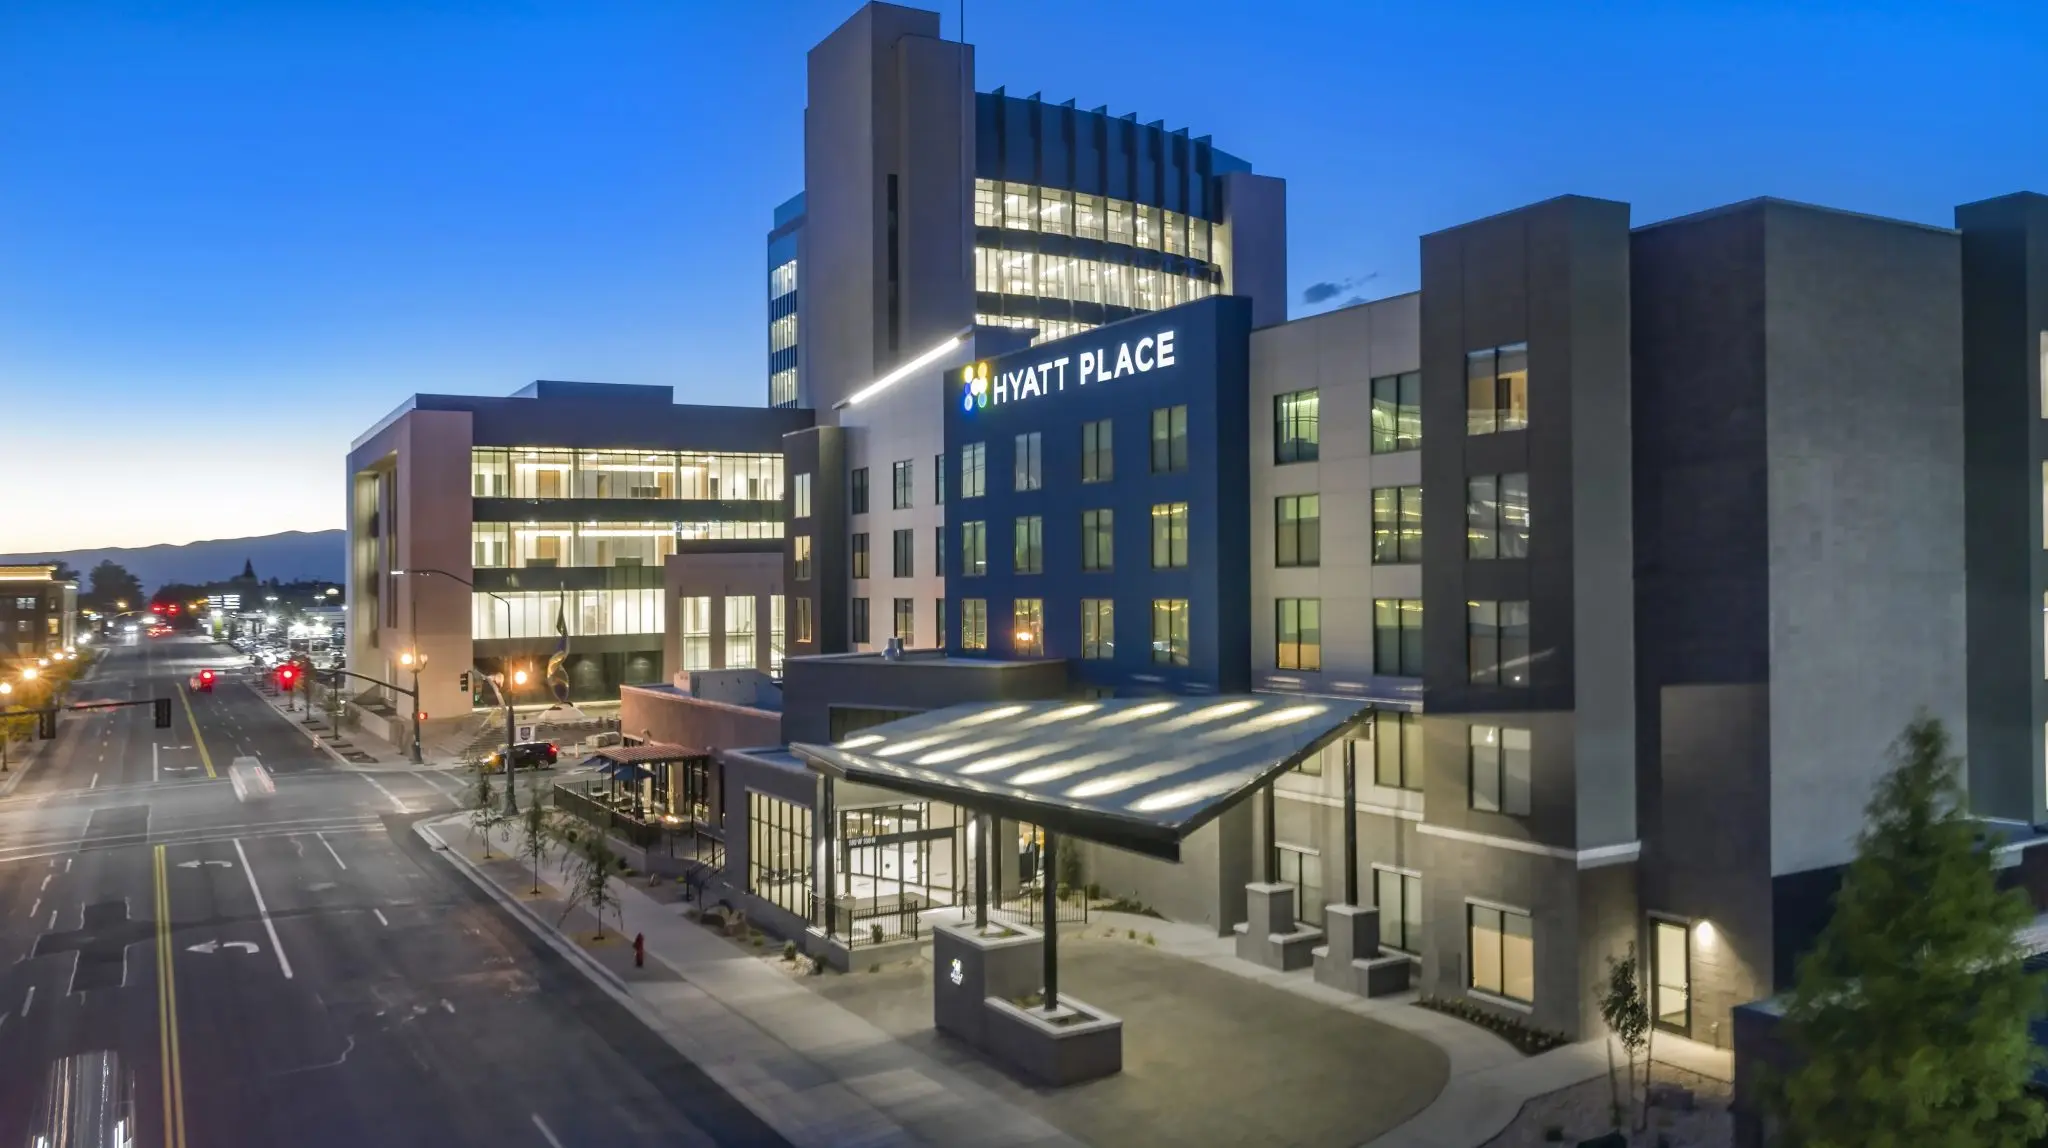 Stay at Hyatt Place Provo